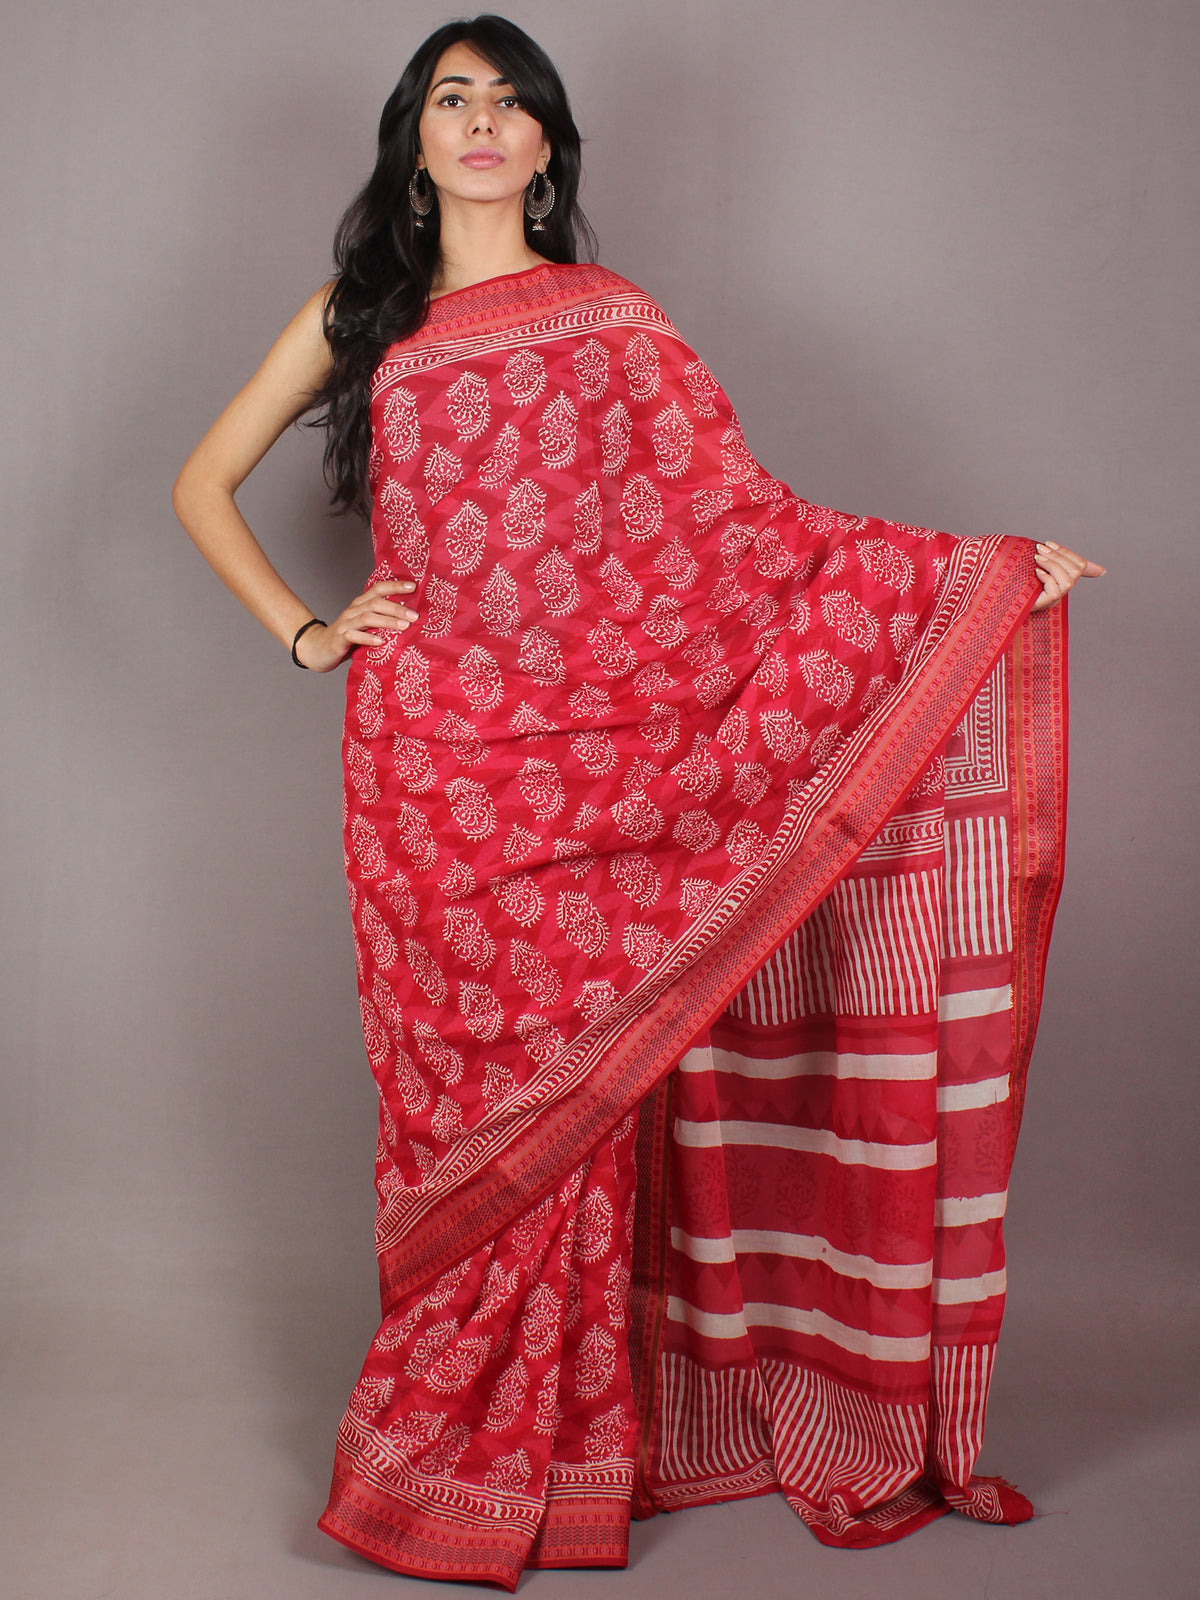 Pink Ivory Hand Block Printed in Natural Colors Cotton Mul Saree With Resham Border - S03170708